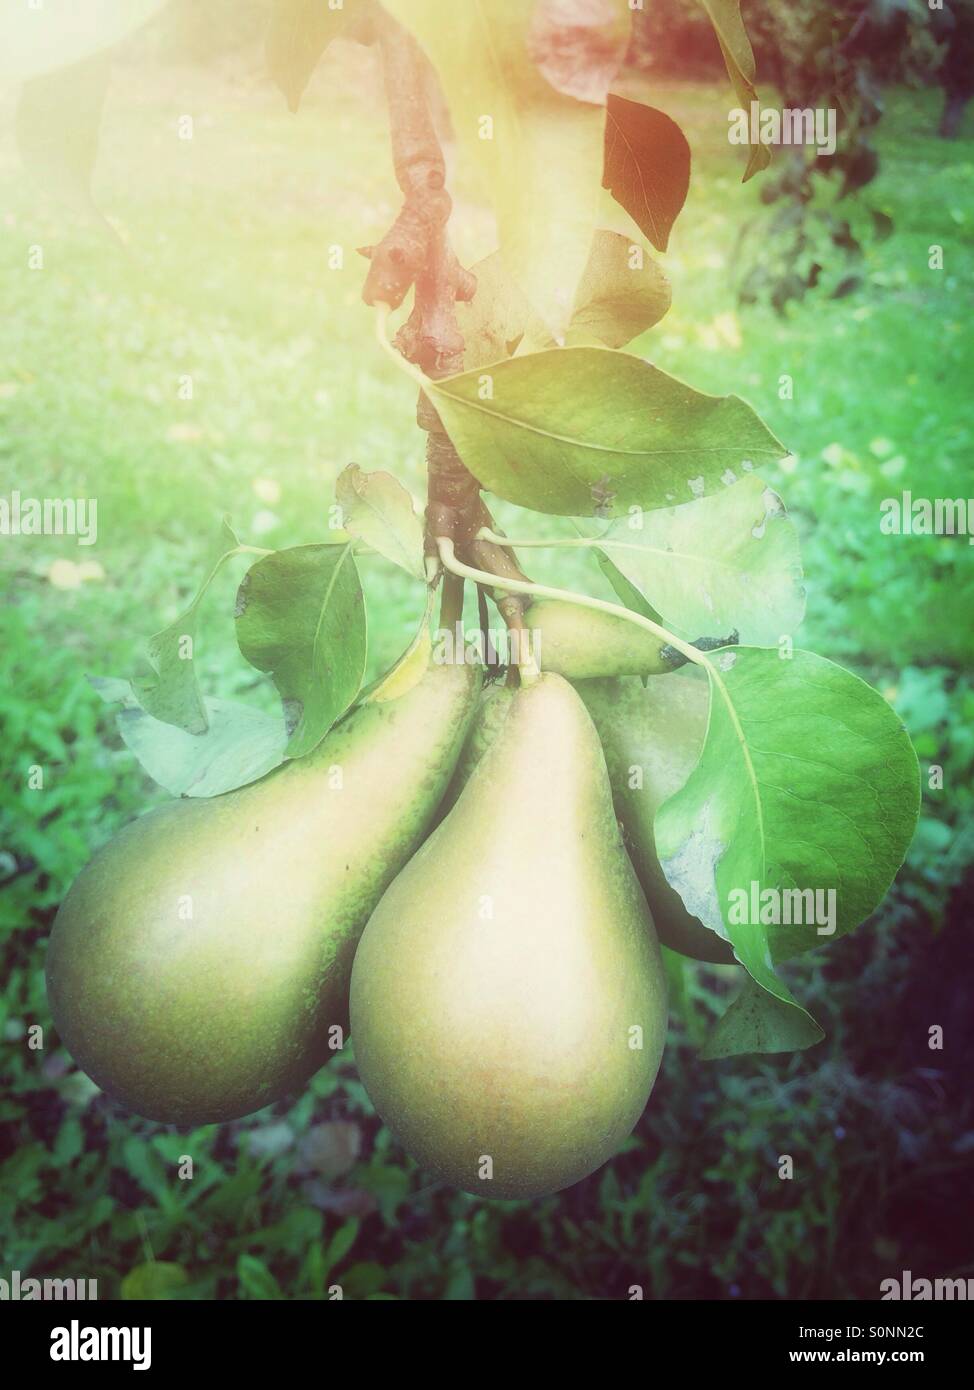 Pair of  green pear fruits Stock Photo